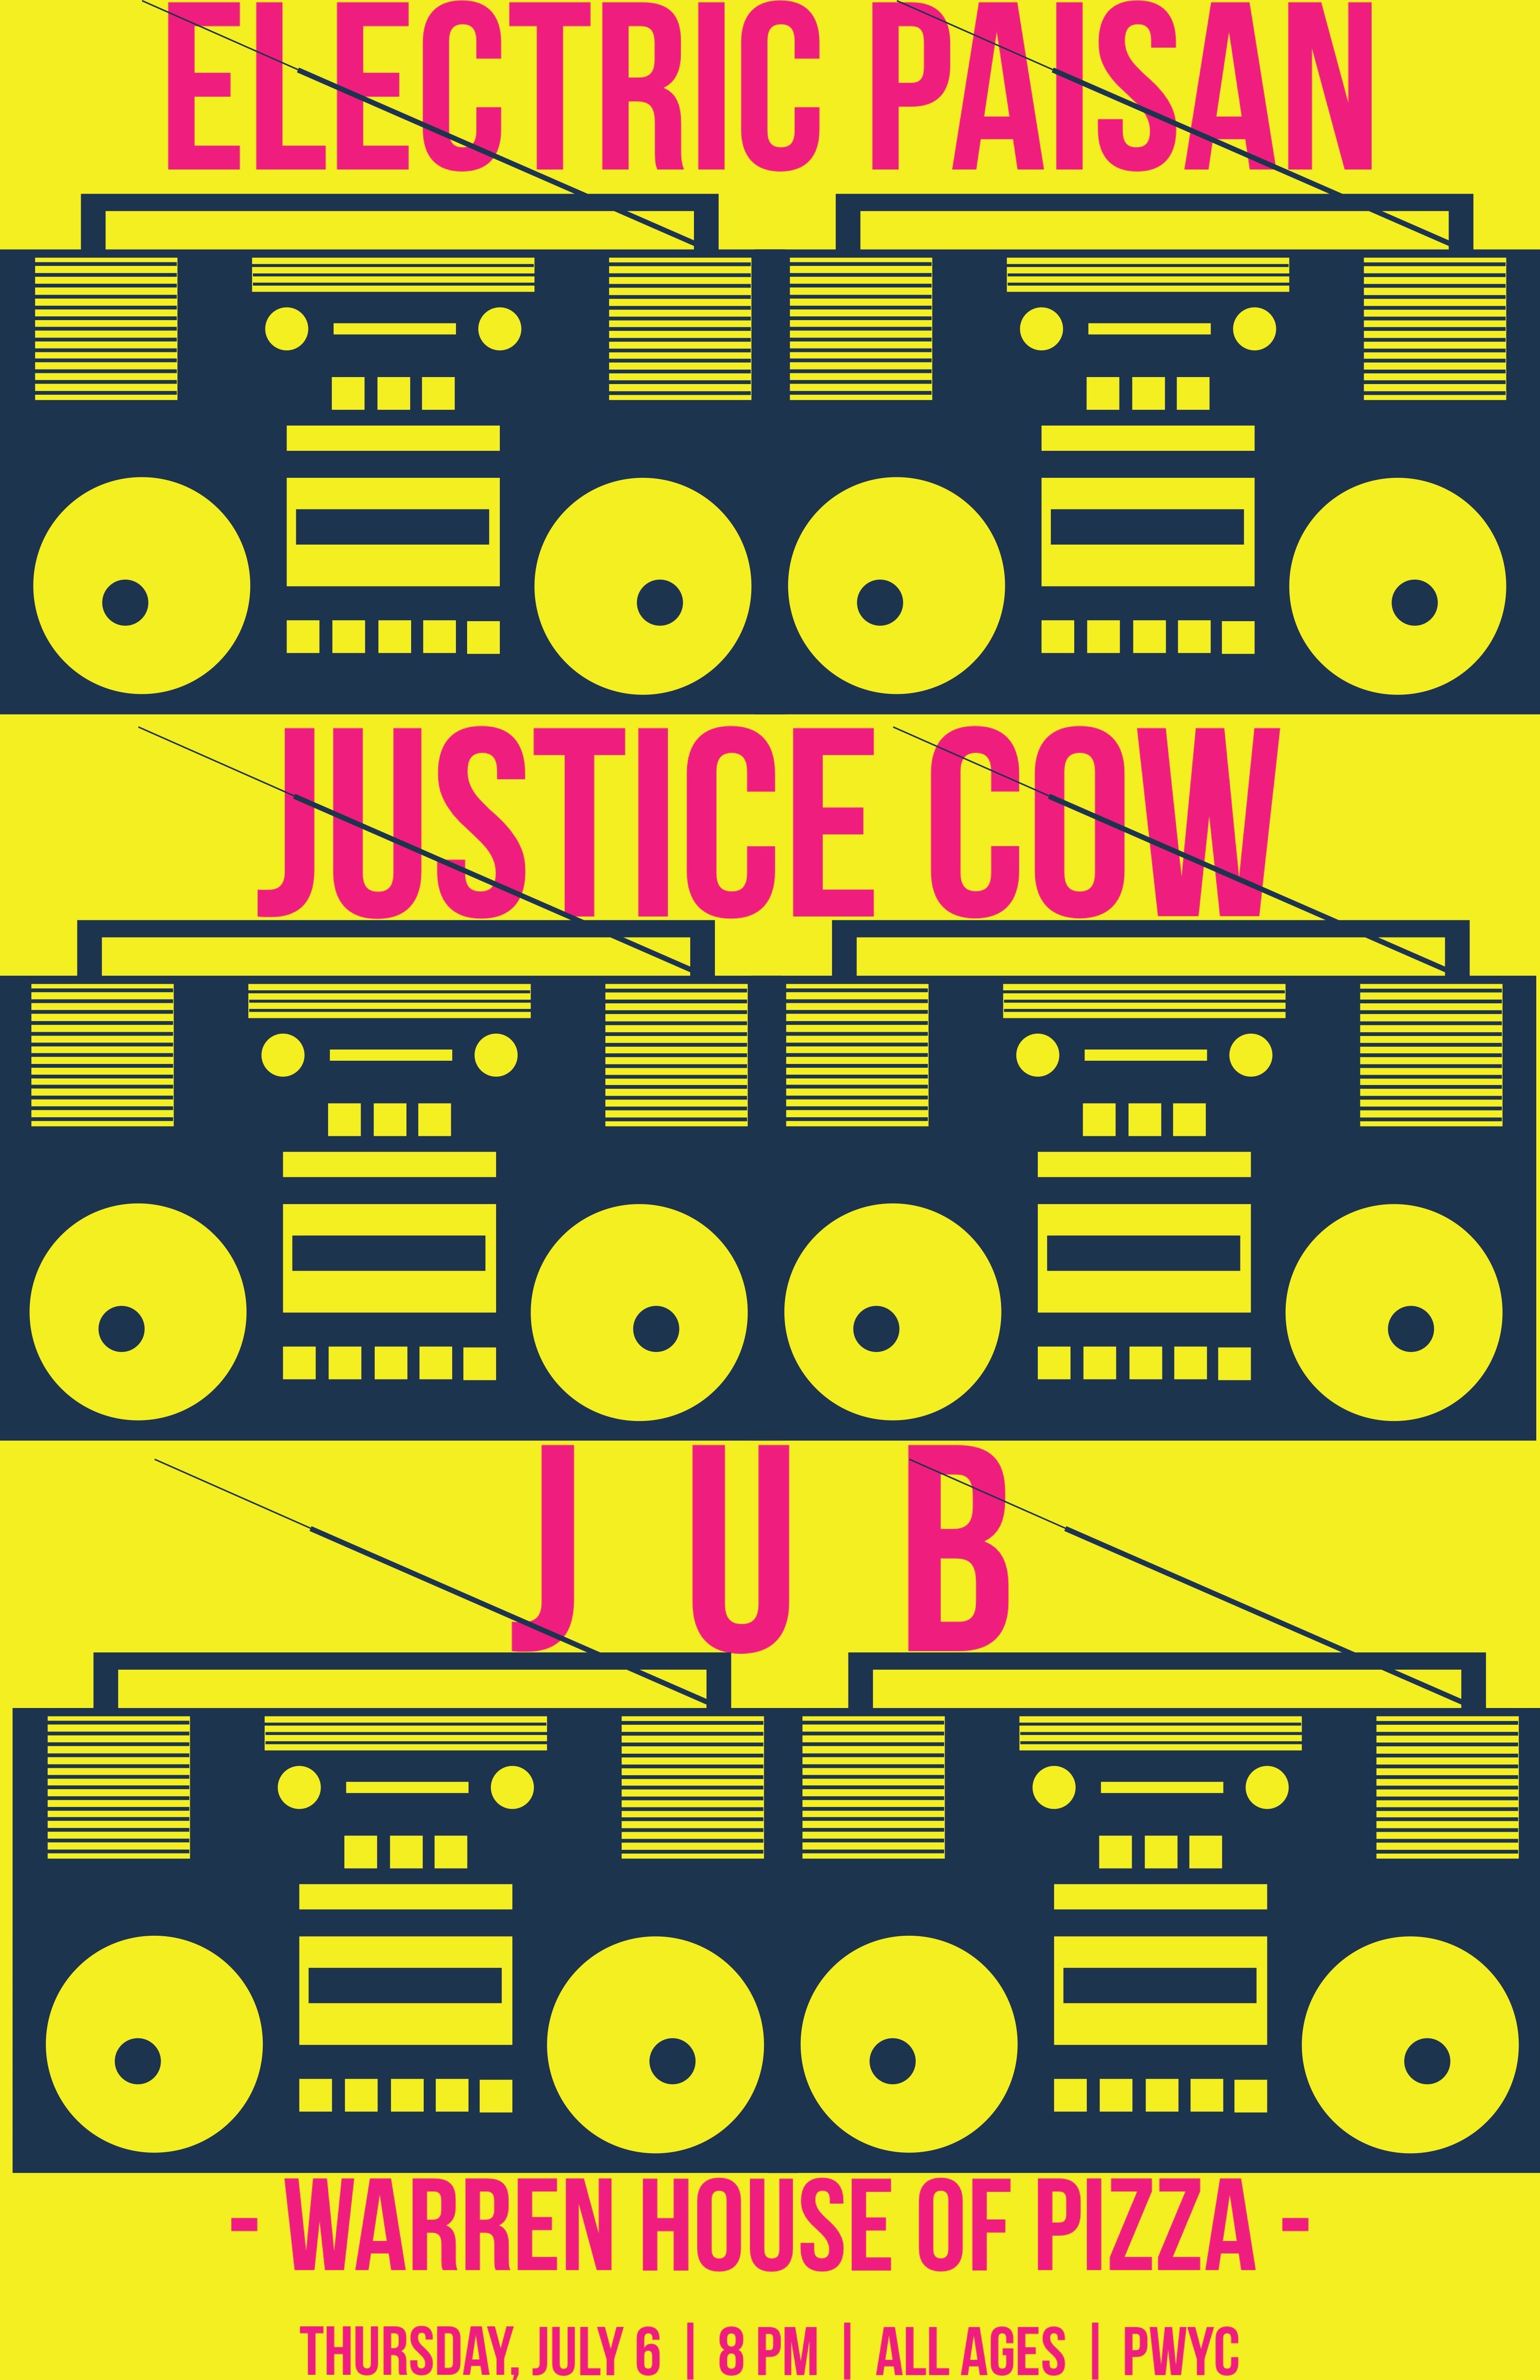 Electric Paisan, Justice Cow, Jub at Warren House of Pizza, Thursday, July 6, 8 pm, All Ages, PWYC